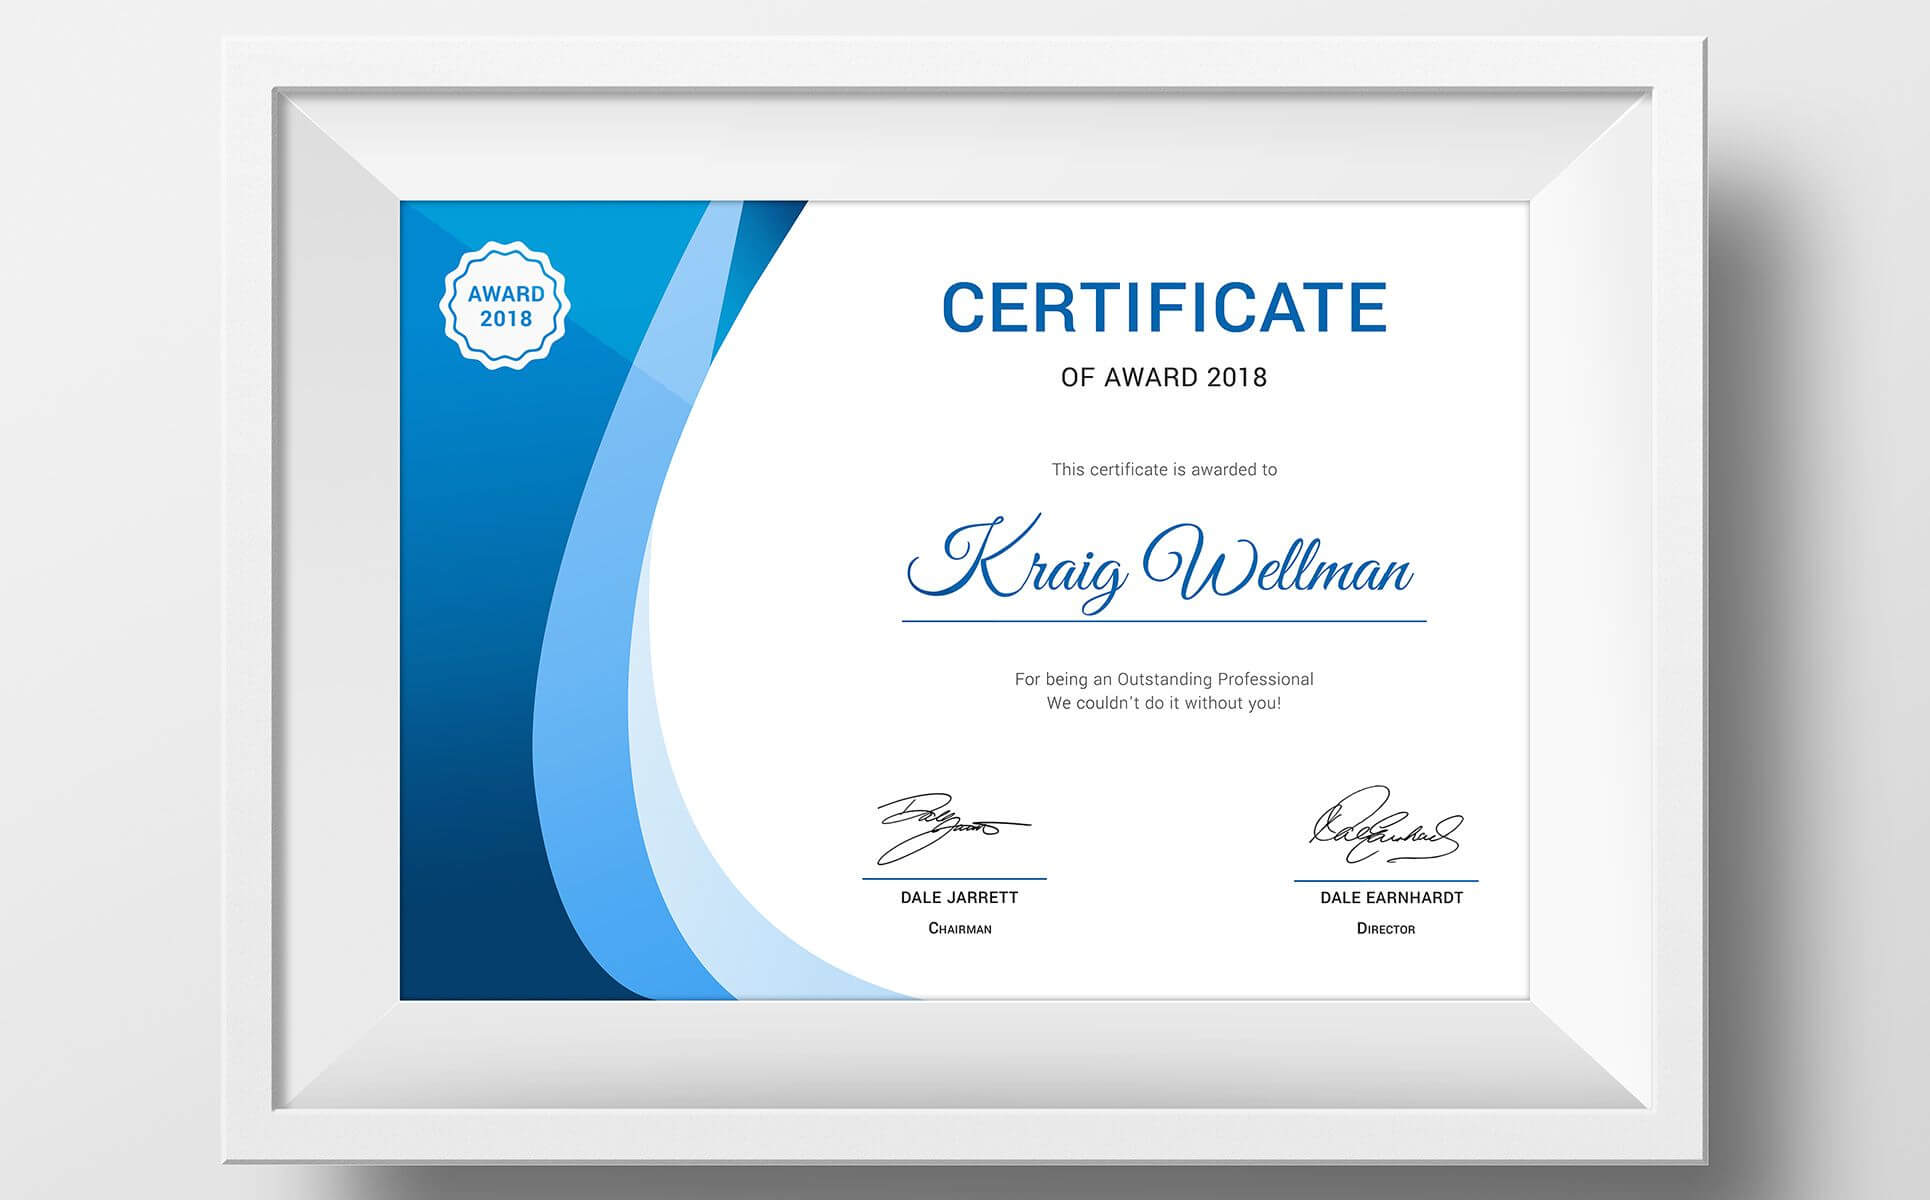 Award Certificate Template #73891 | Design Illustration Art Within Small Certificate Template